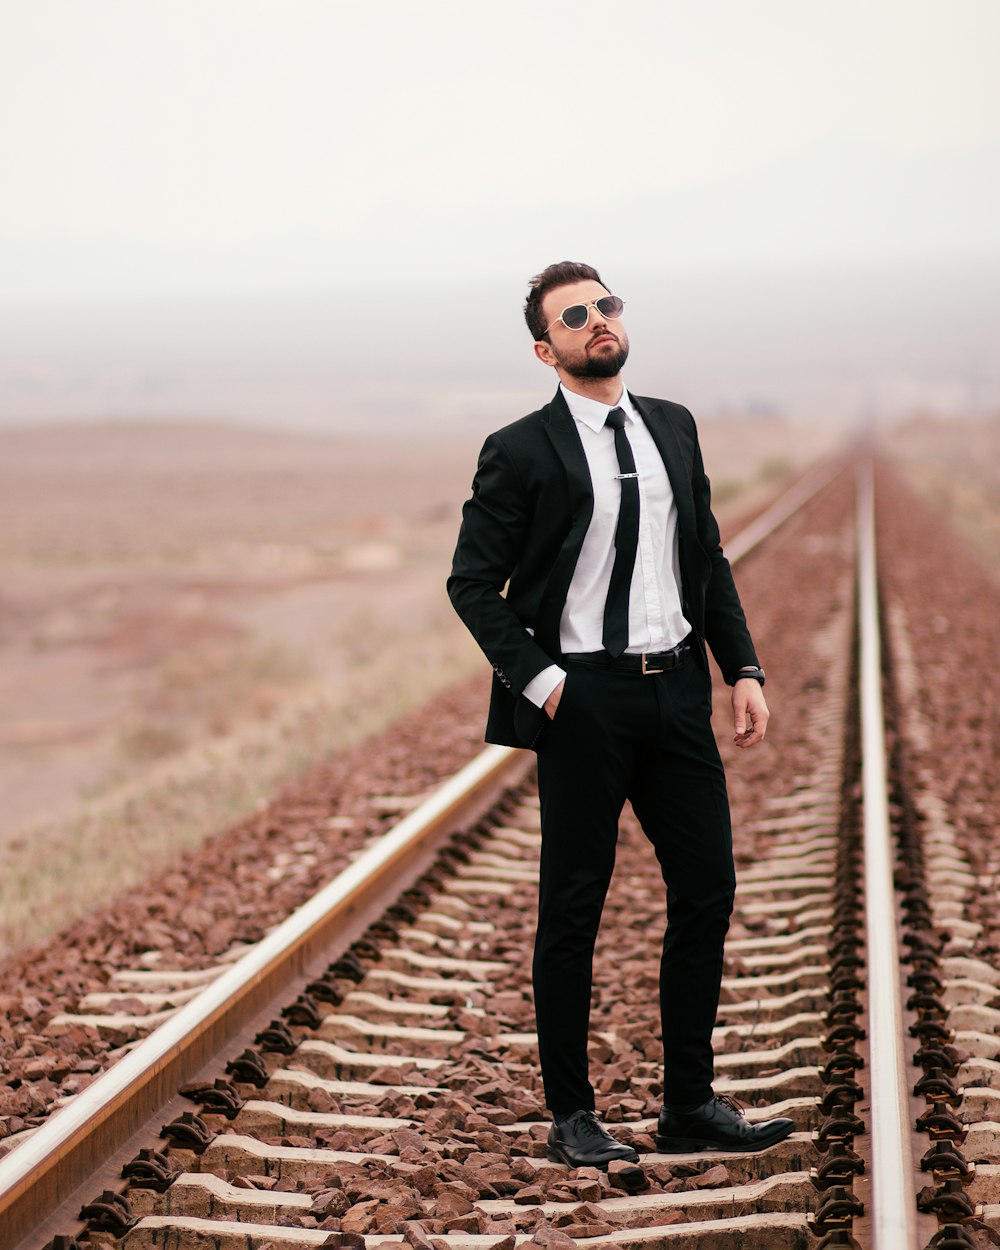 a man in a suit standing on a train track